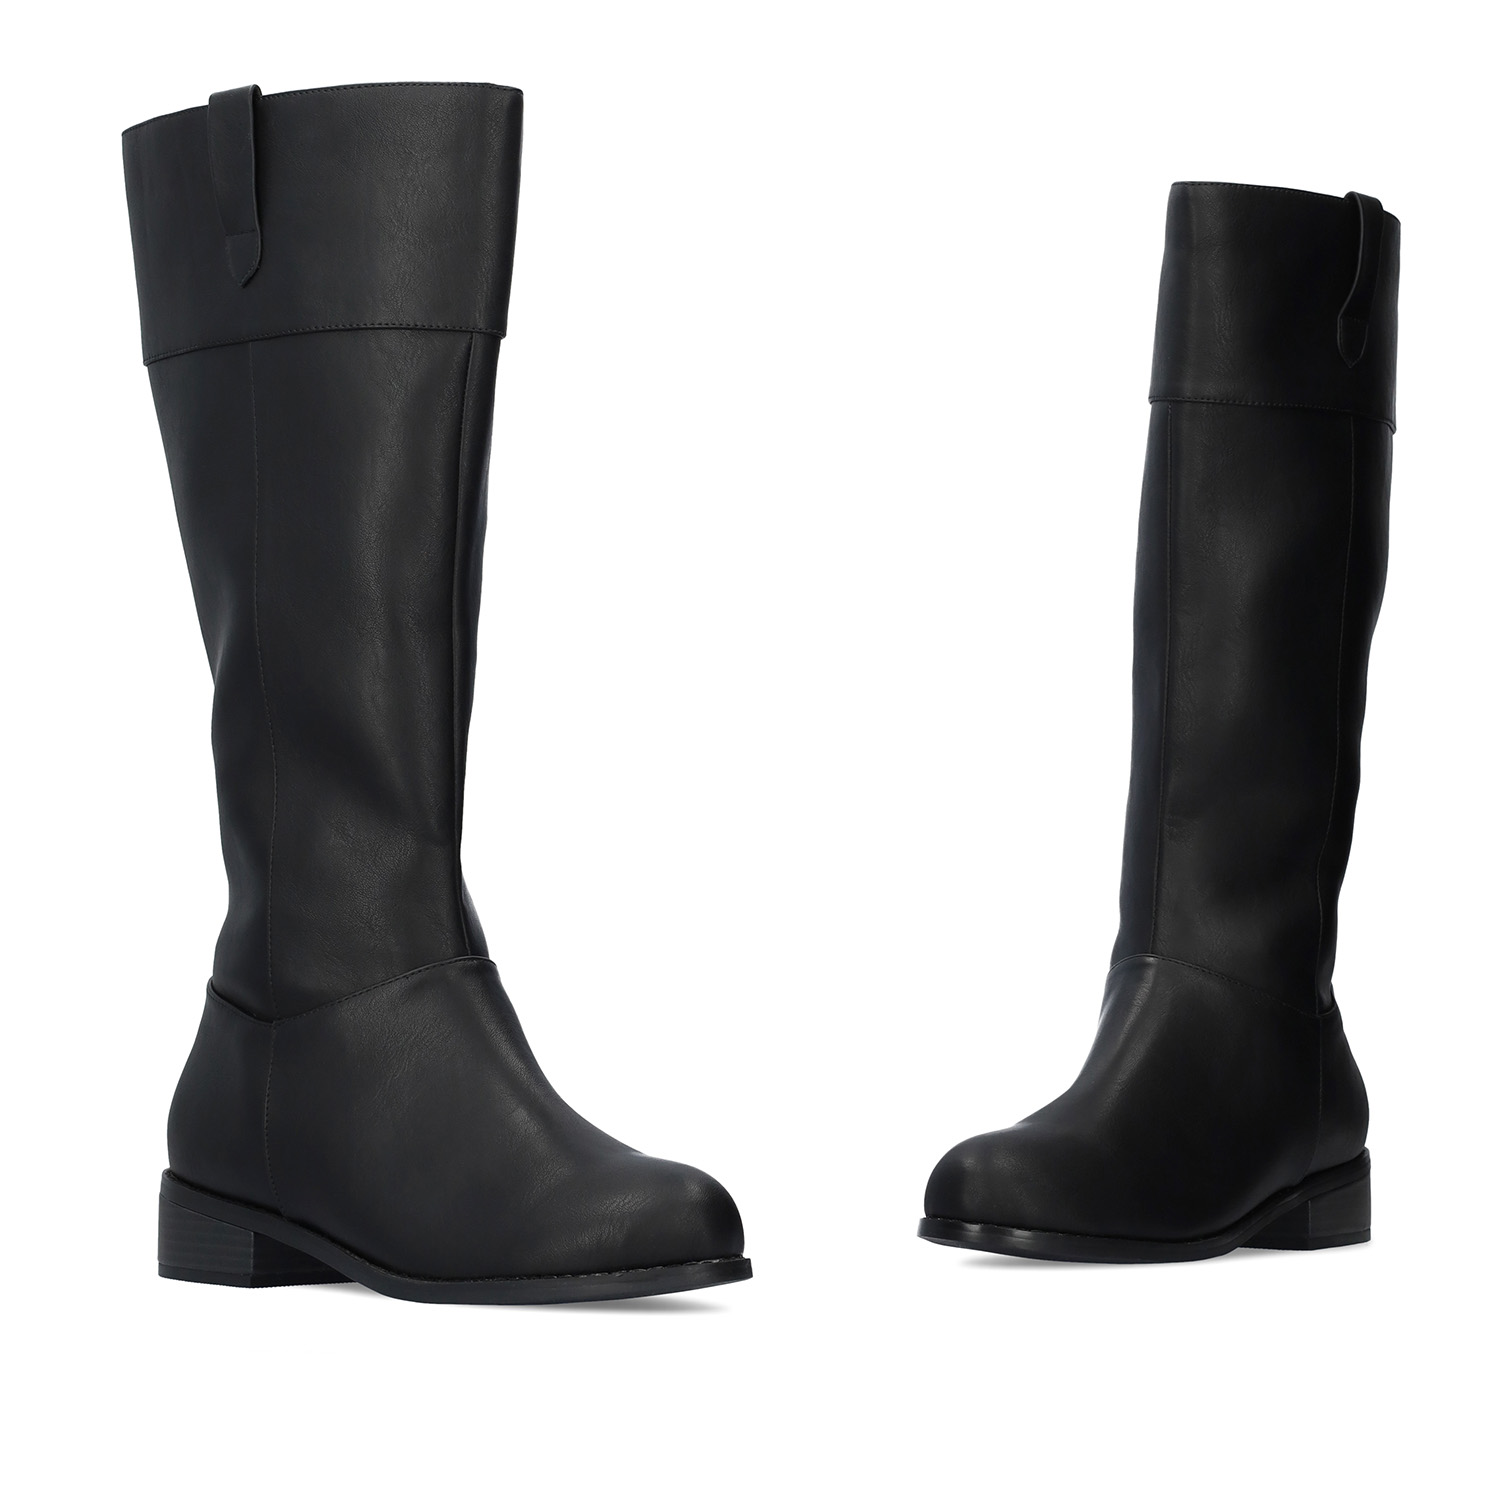 Flat high-calf boots in black faux leather. 